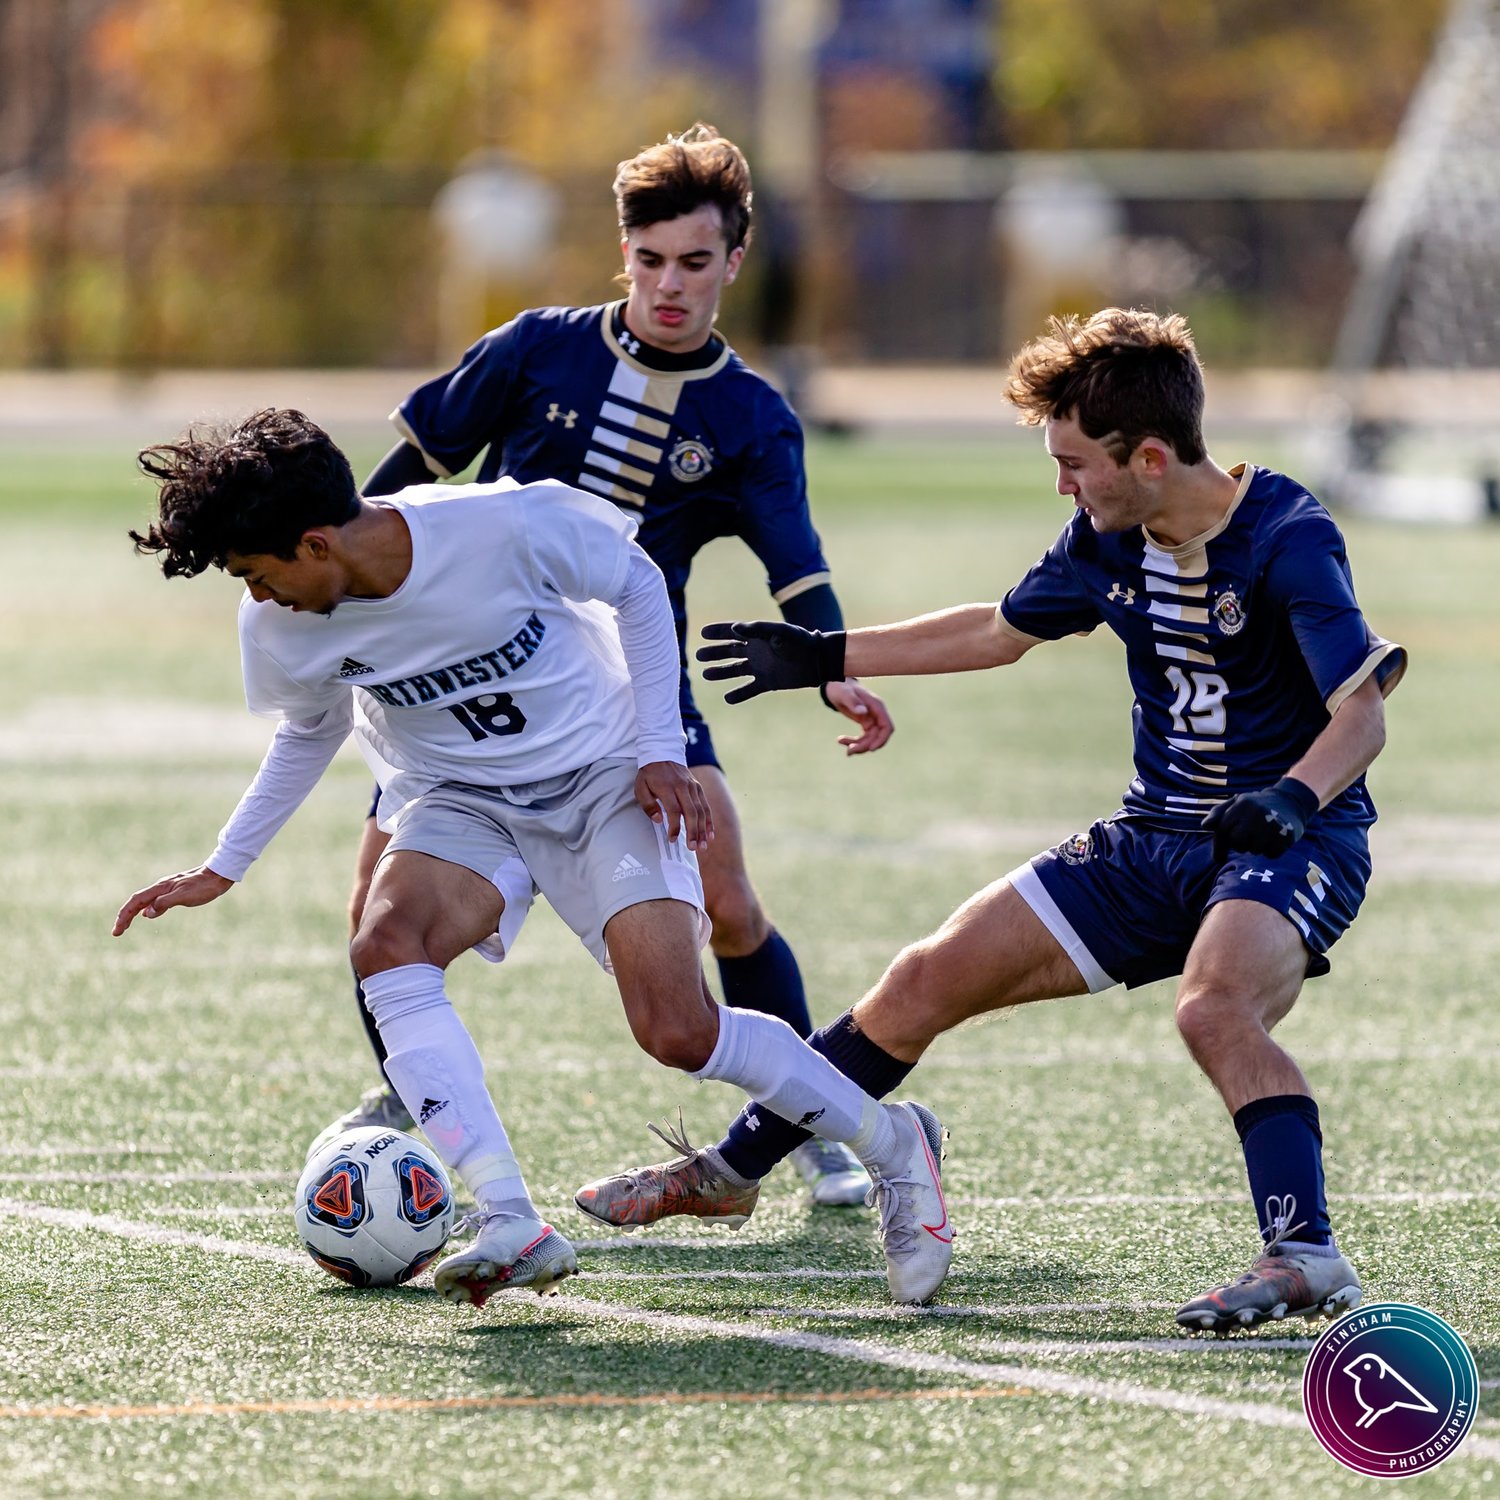 The Falcon defense was stout in a 2-1 loss to Northwestern.